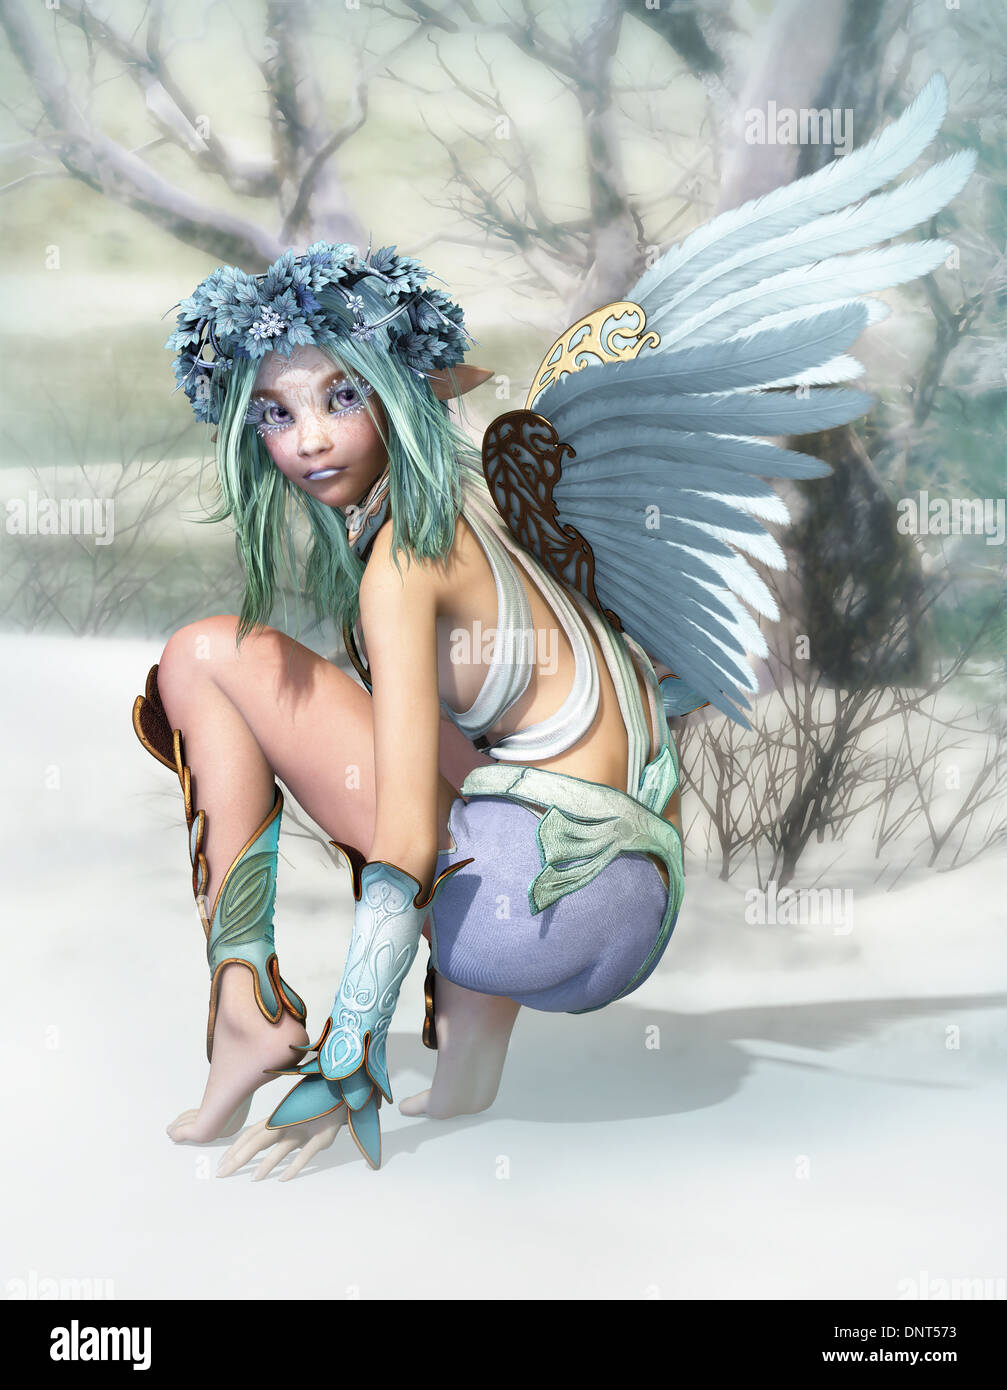 3D computer graphics of a cheeky little fairy in a winter landscape Stock Photo